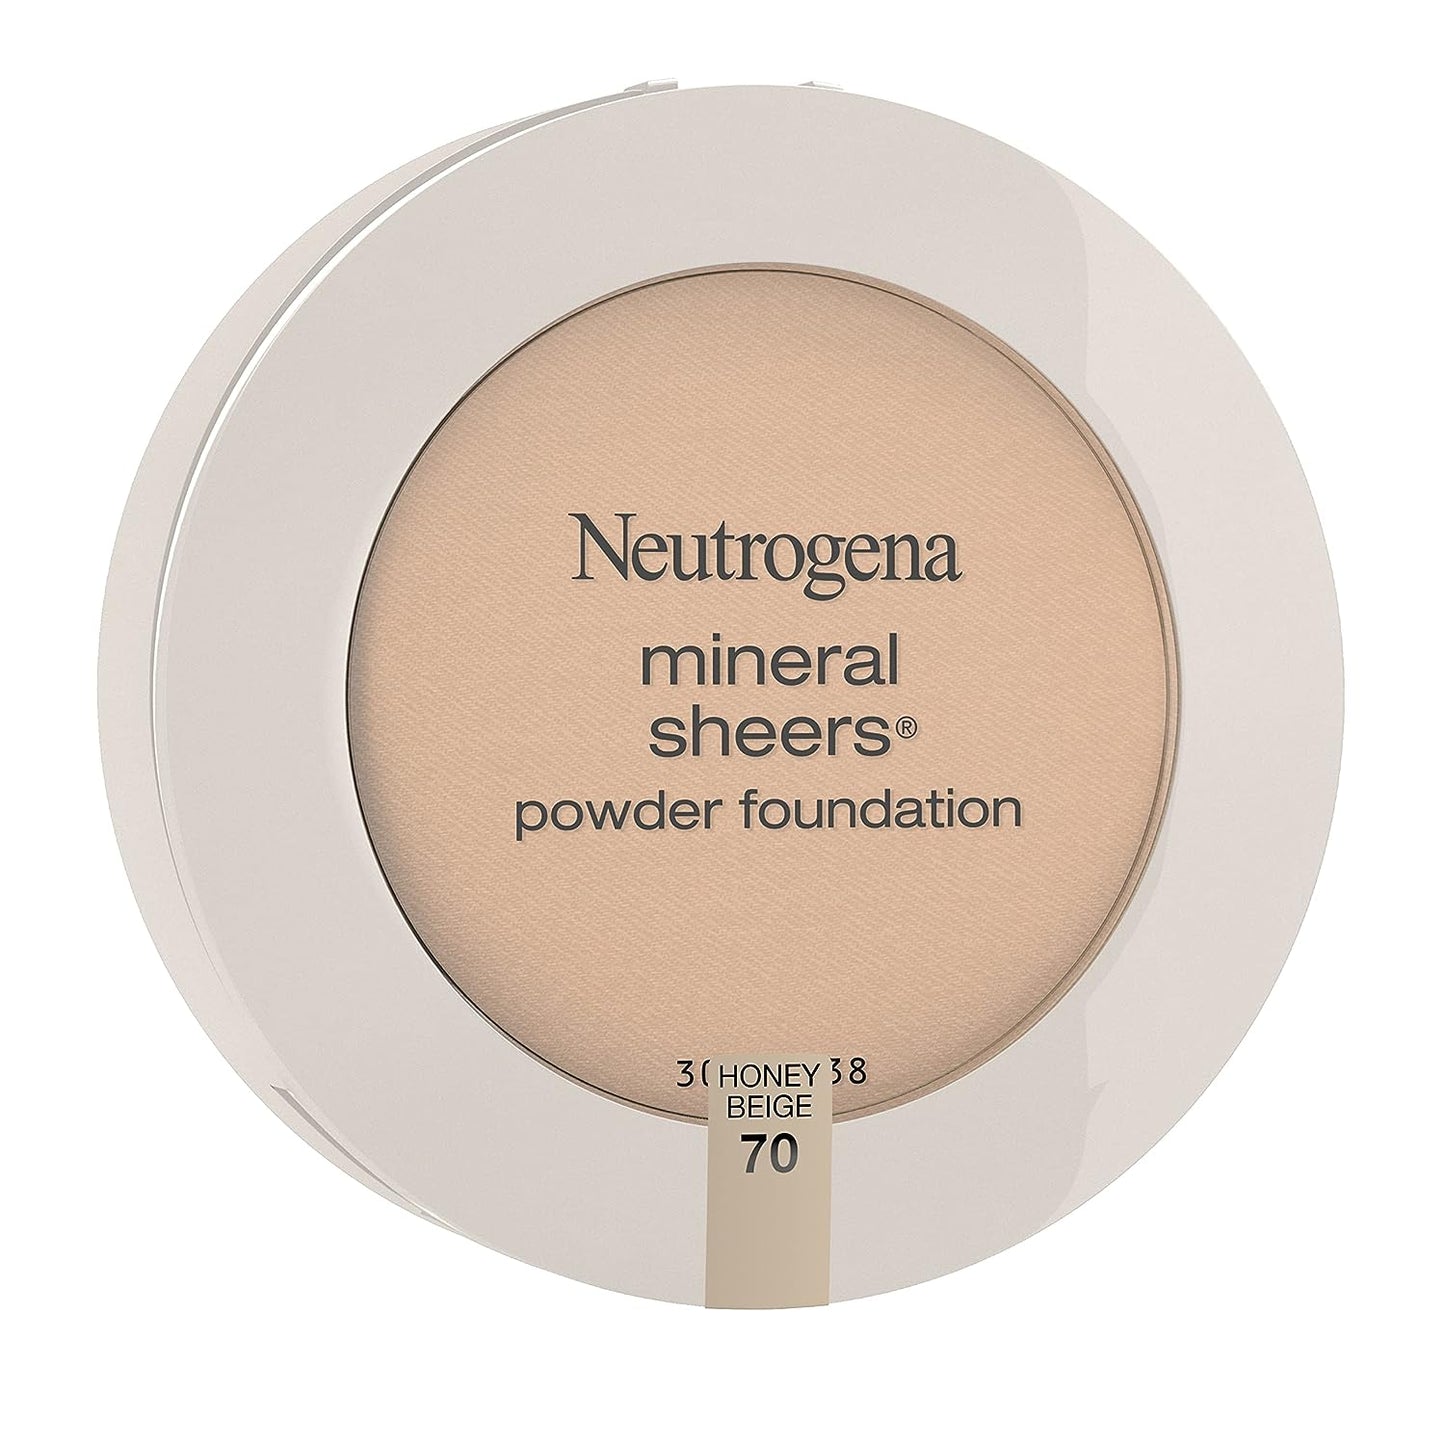 Neutrogena Mineral Sheers Compact Powder Foundation in Natural Ivory 20, 0.34 oz. / 9.6 g (Lightweight & Oil-Free Mineral Foundation)